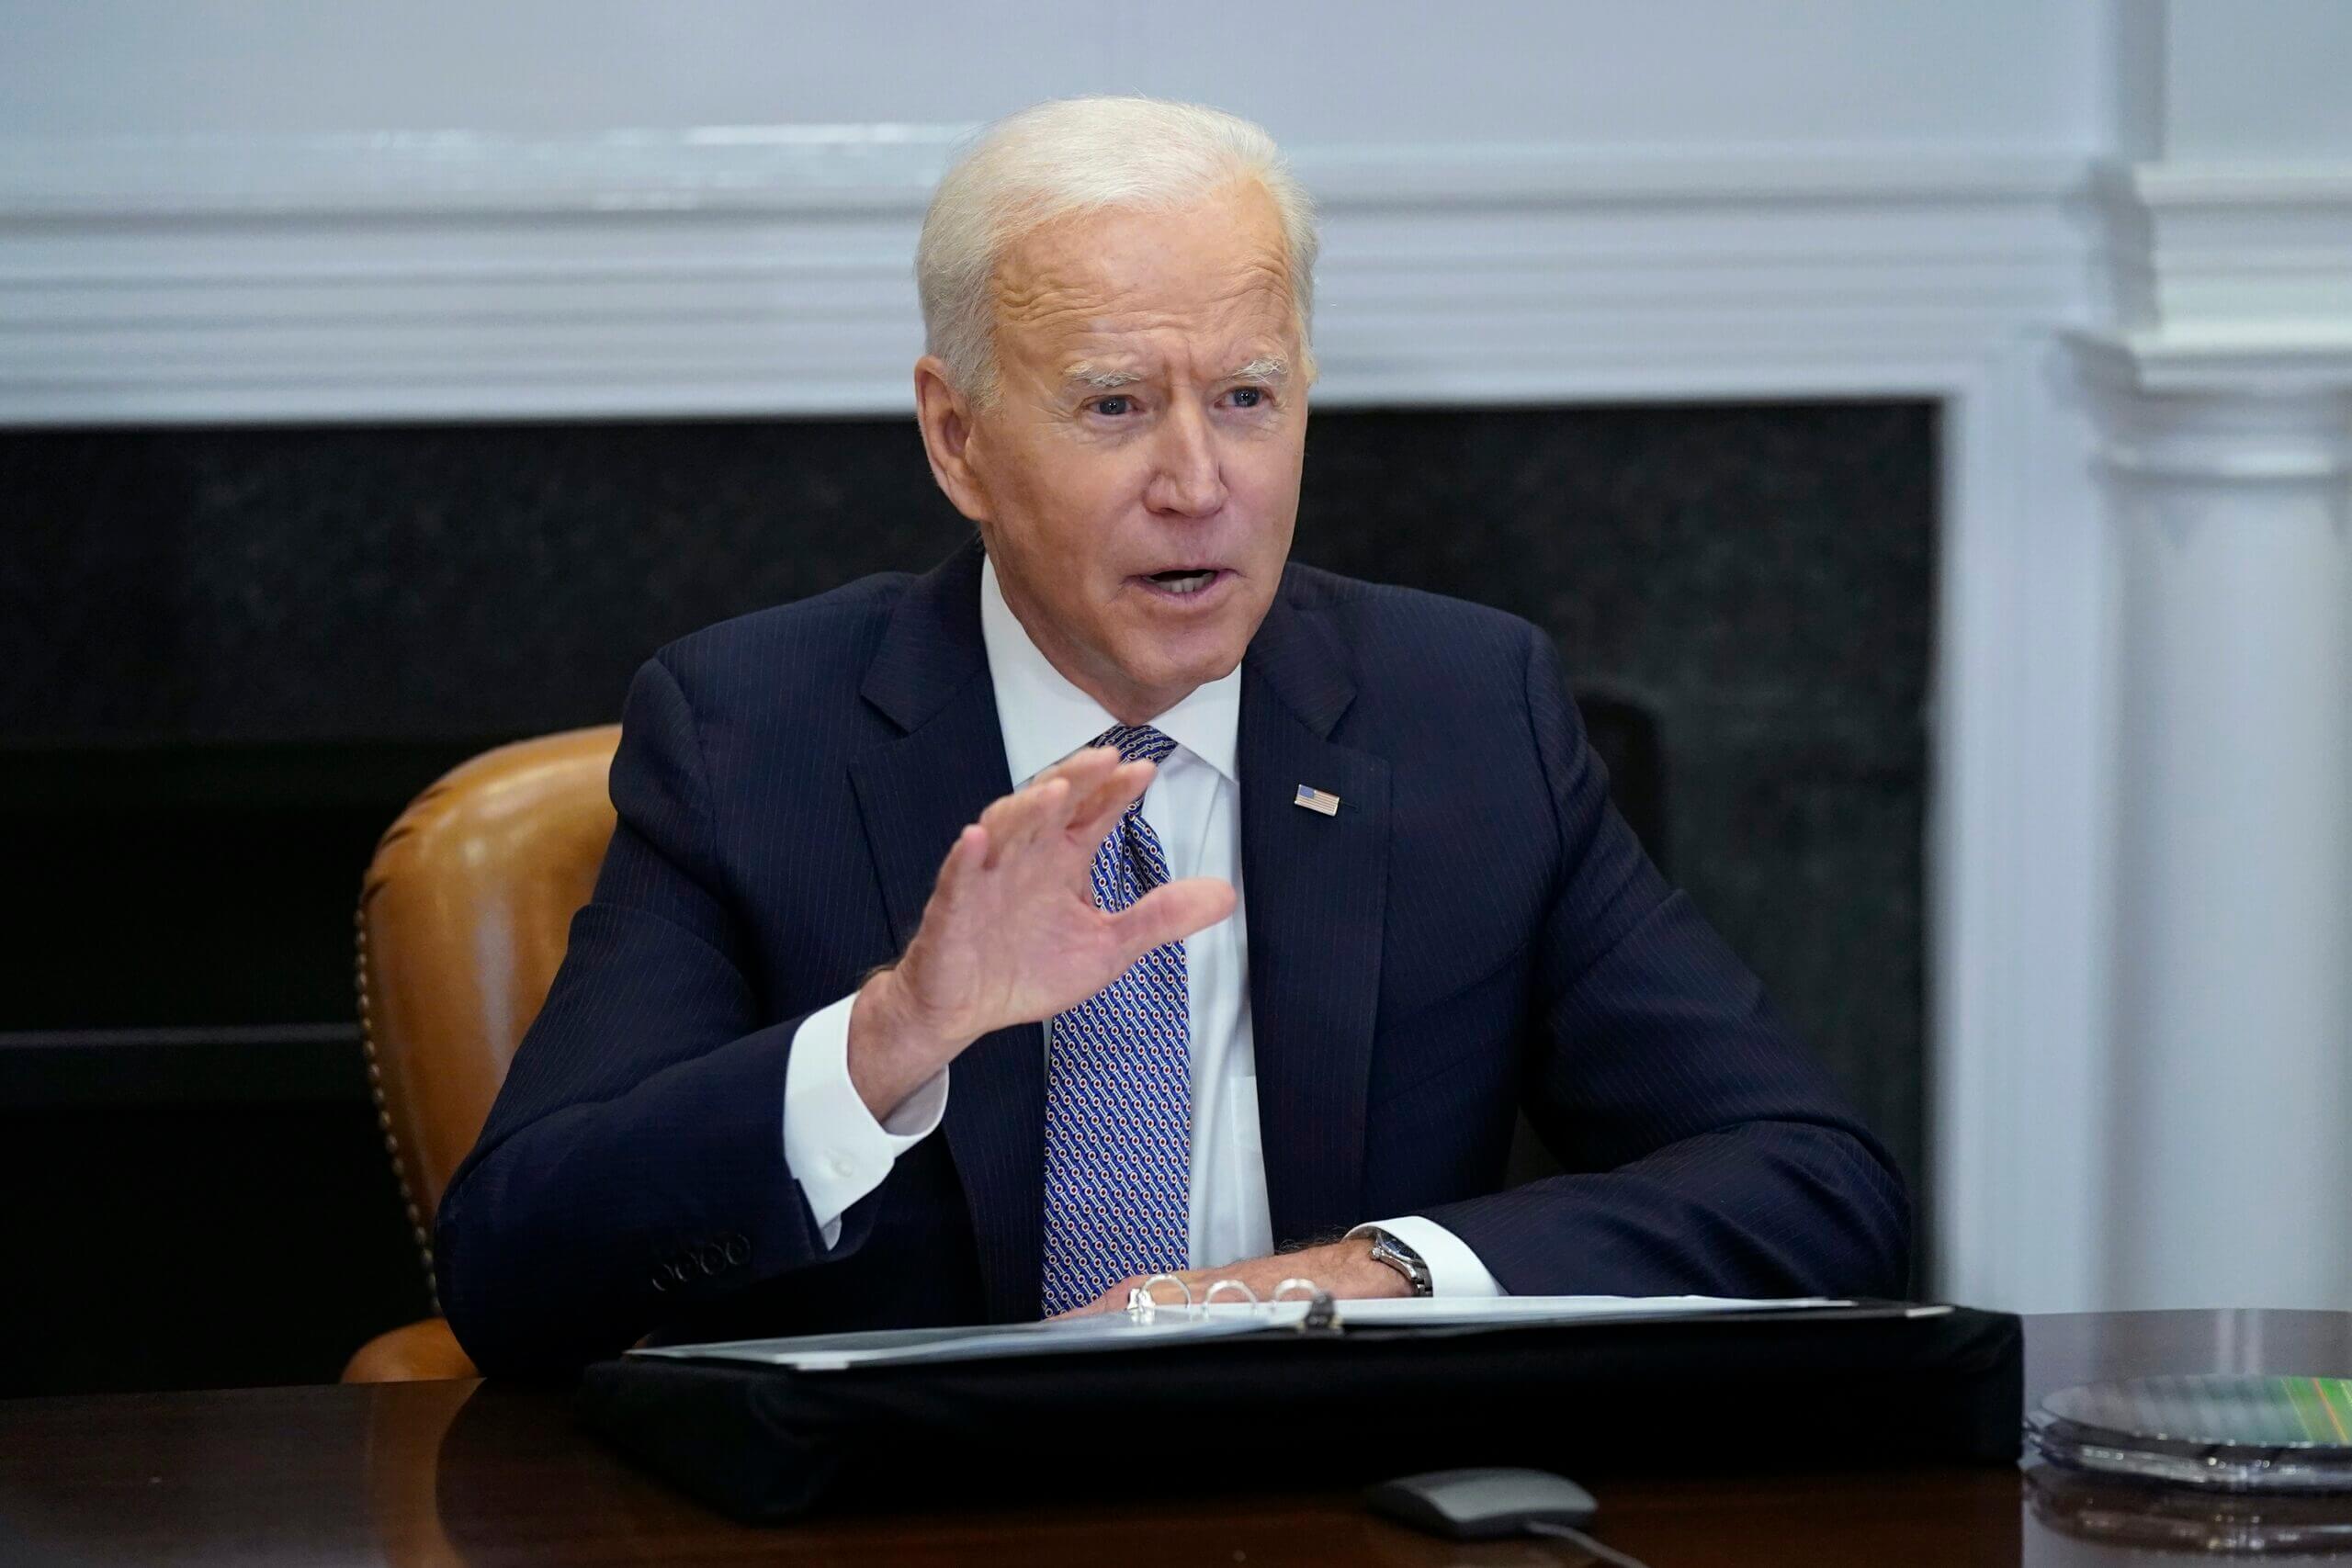 Biden Announces Withdraw of All U.S. Troops from Afghanistan by September 11